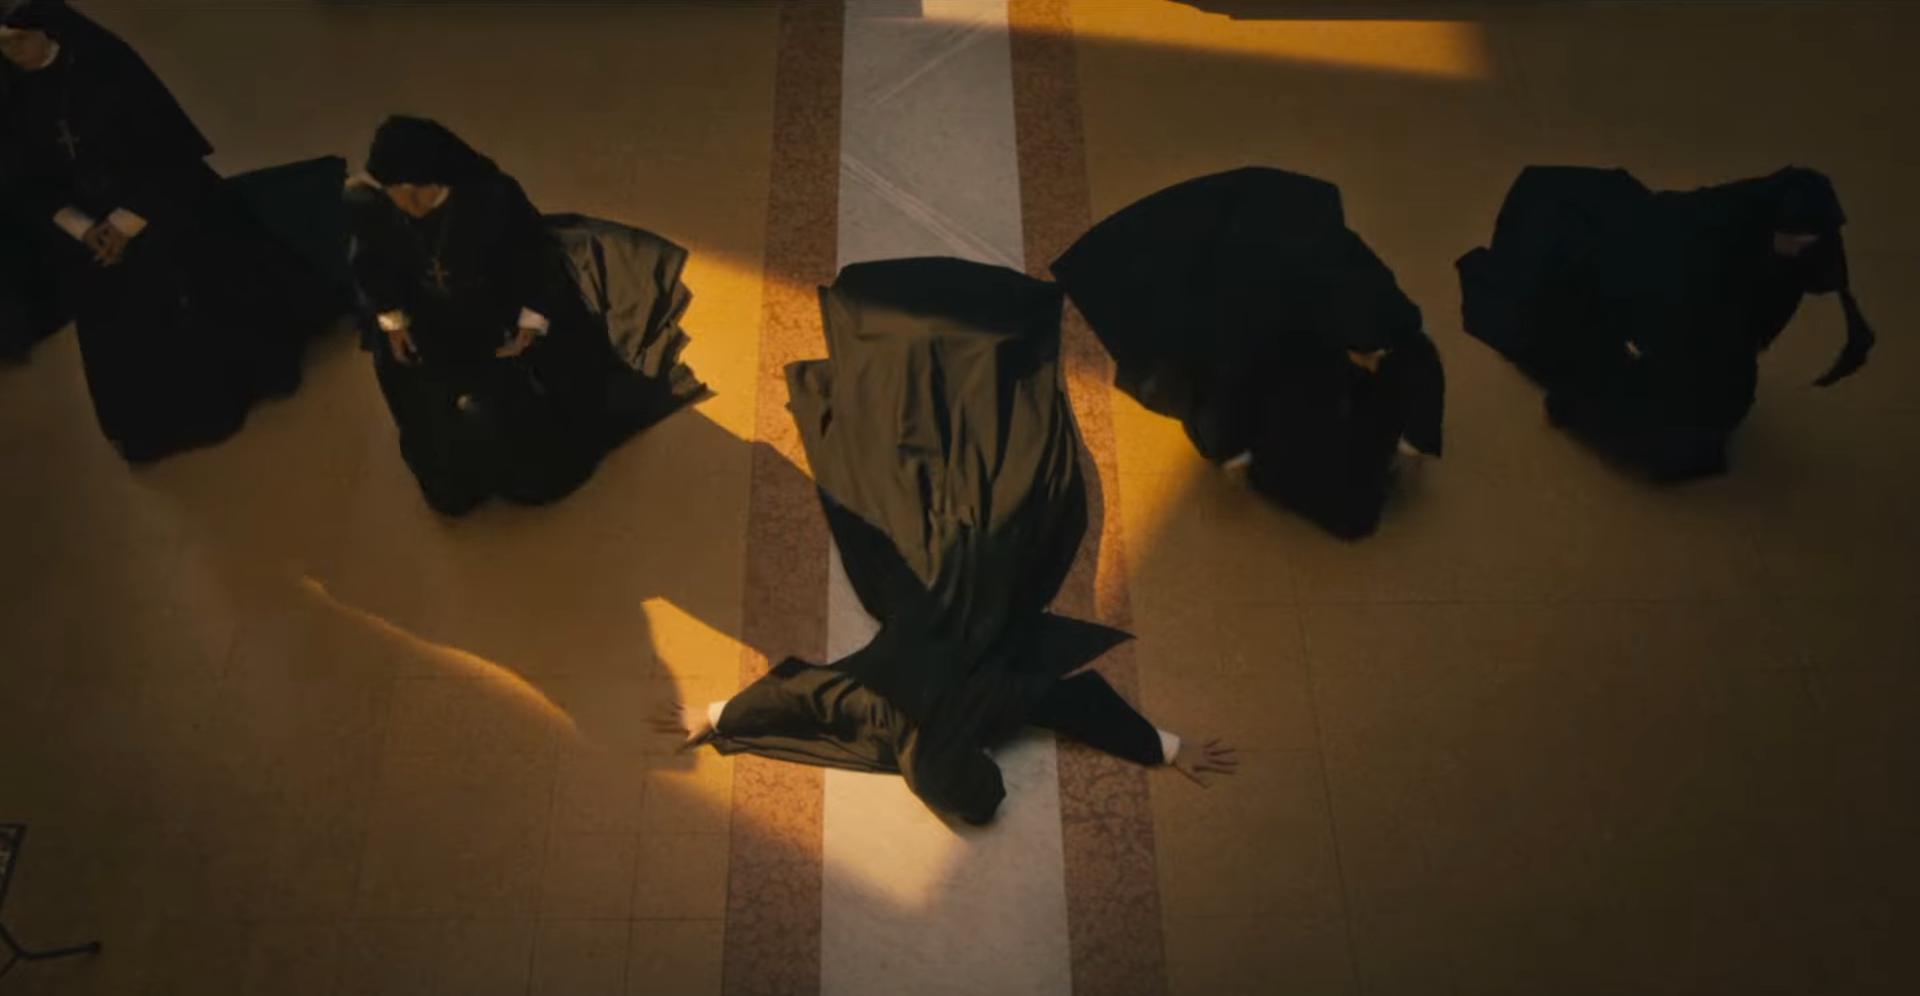 Four people in dark attire lying on the floor around a bright line, creating a dramatic shadow pattern